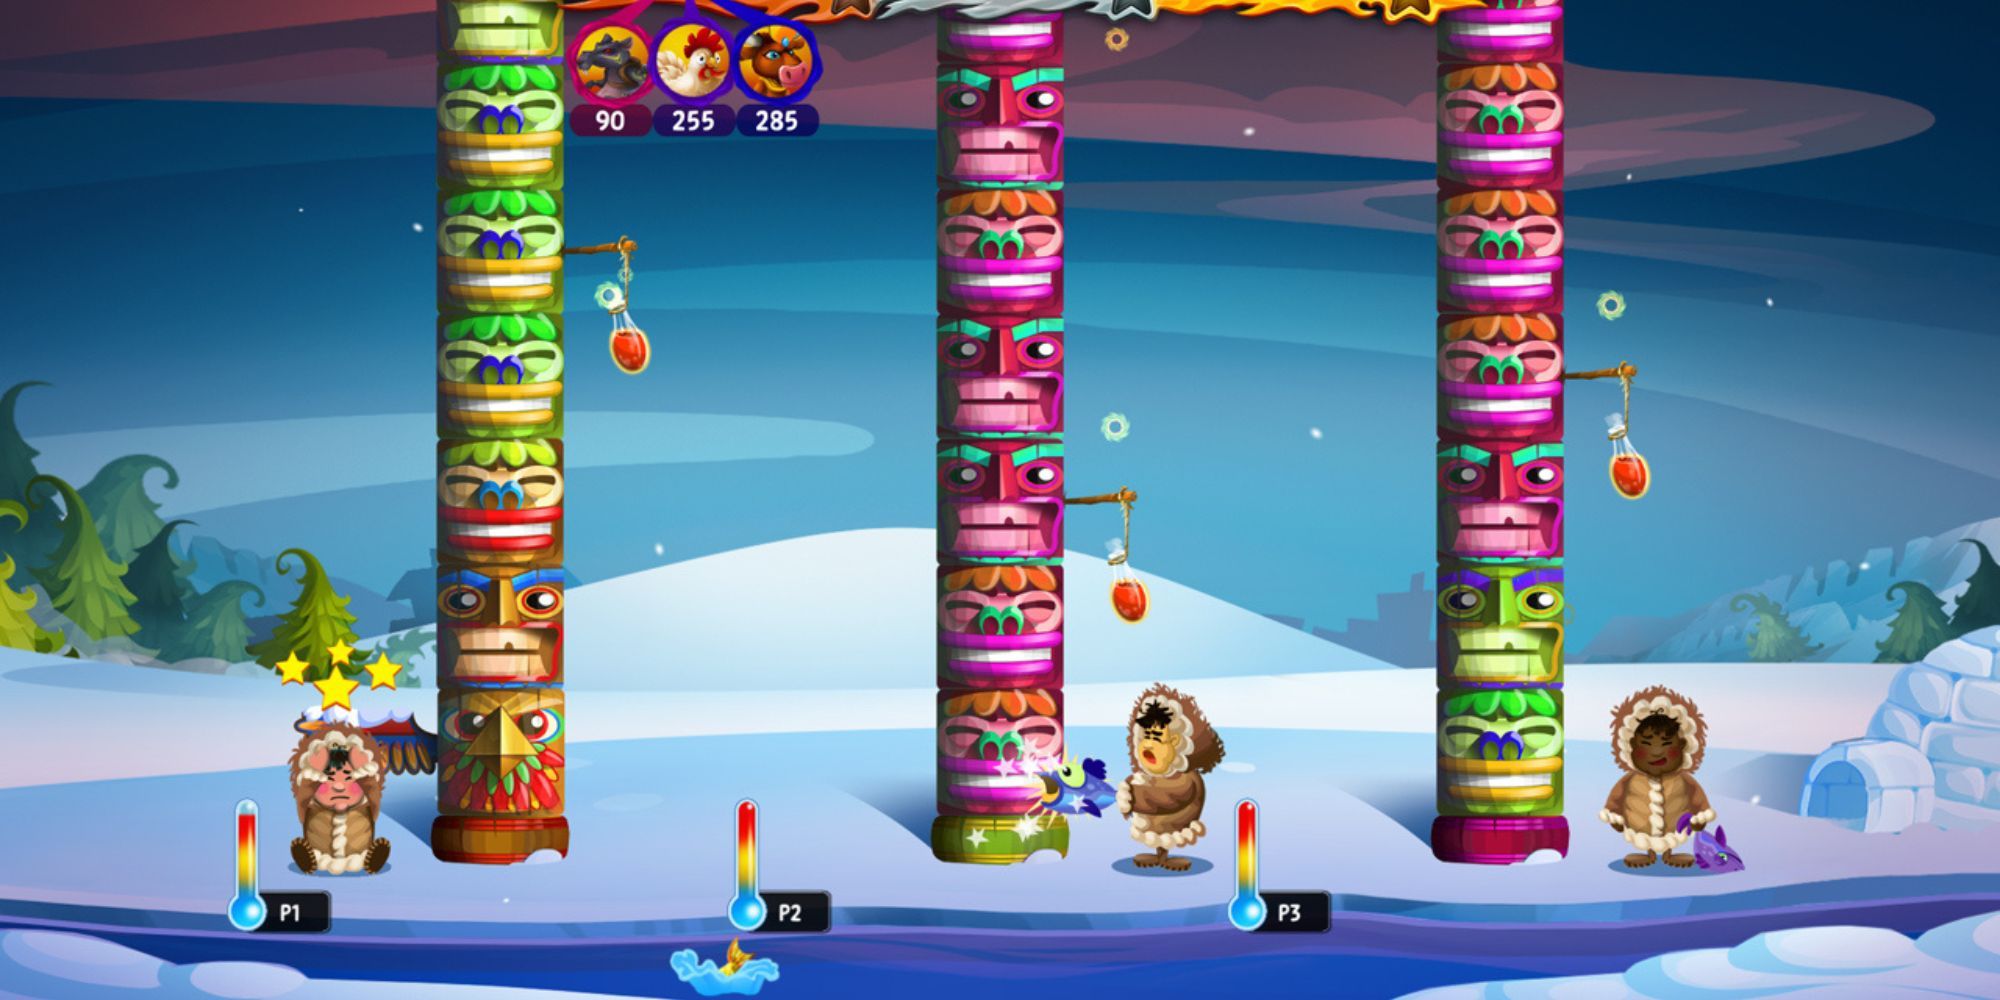 One of many games in the 30-In-1 Game Collection played by three players